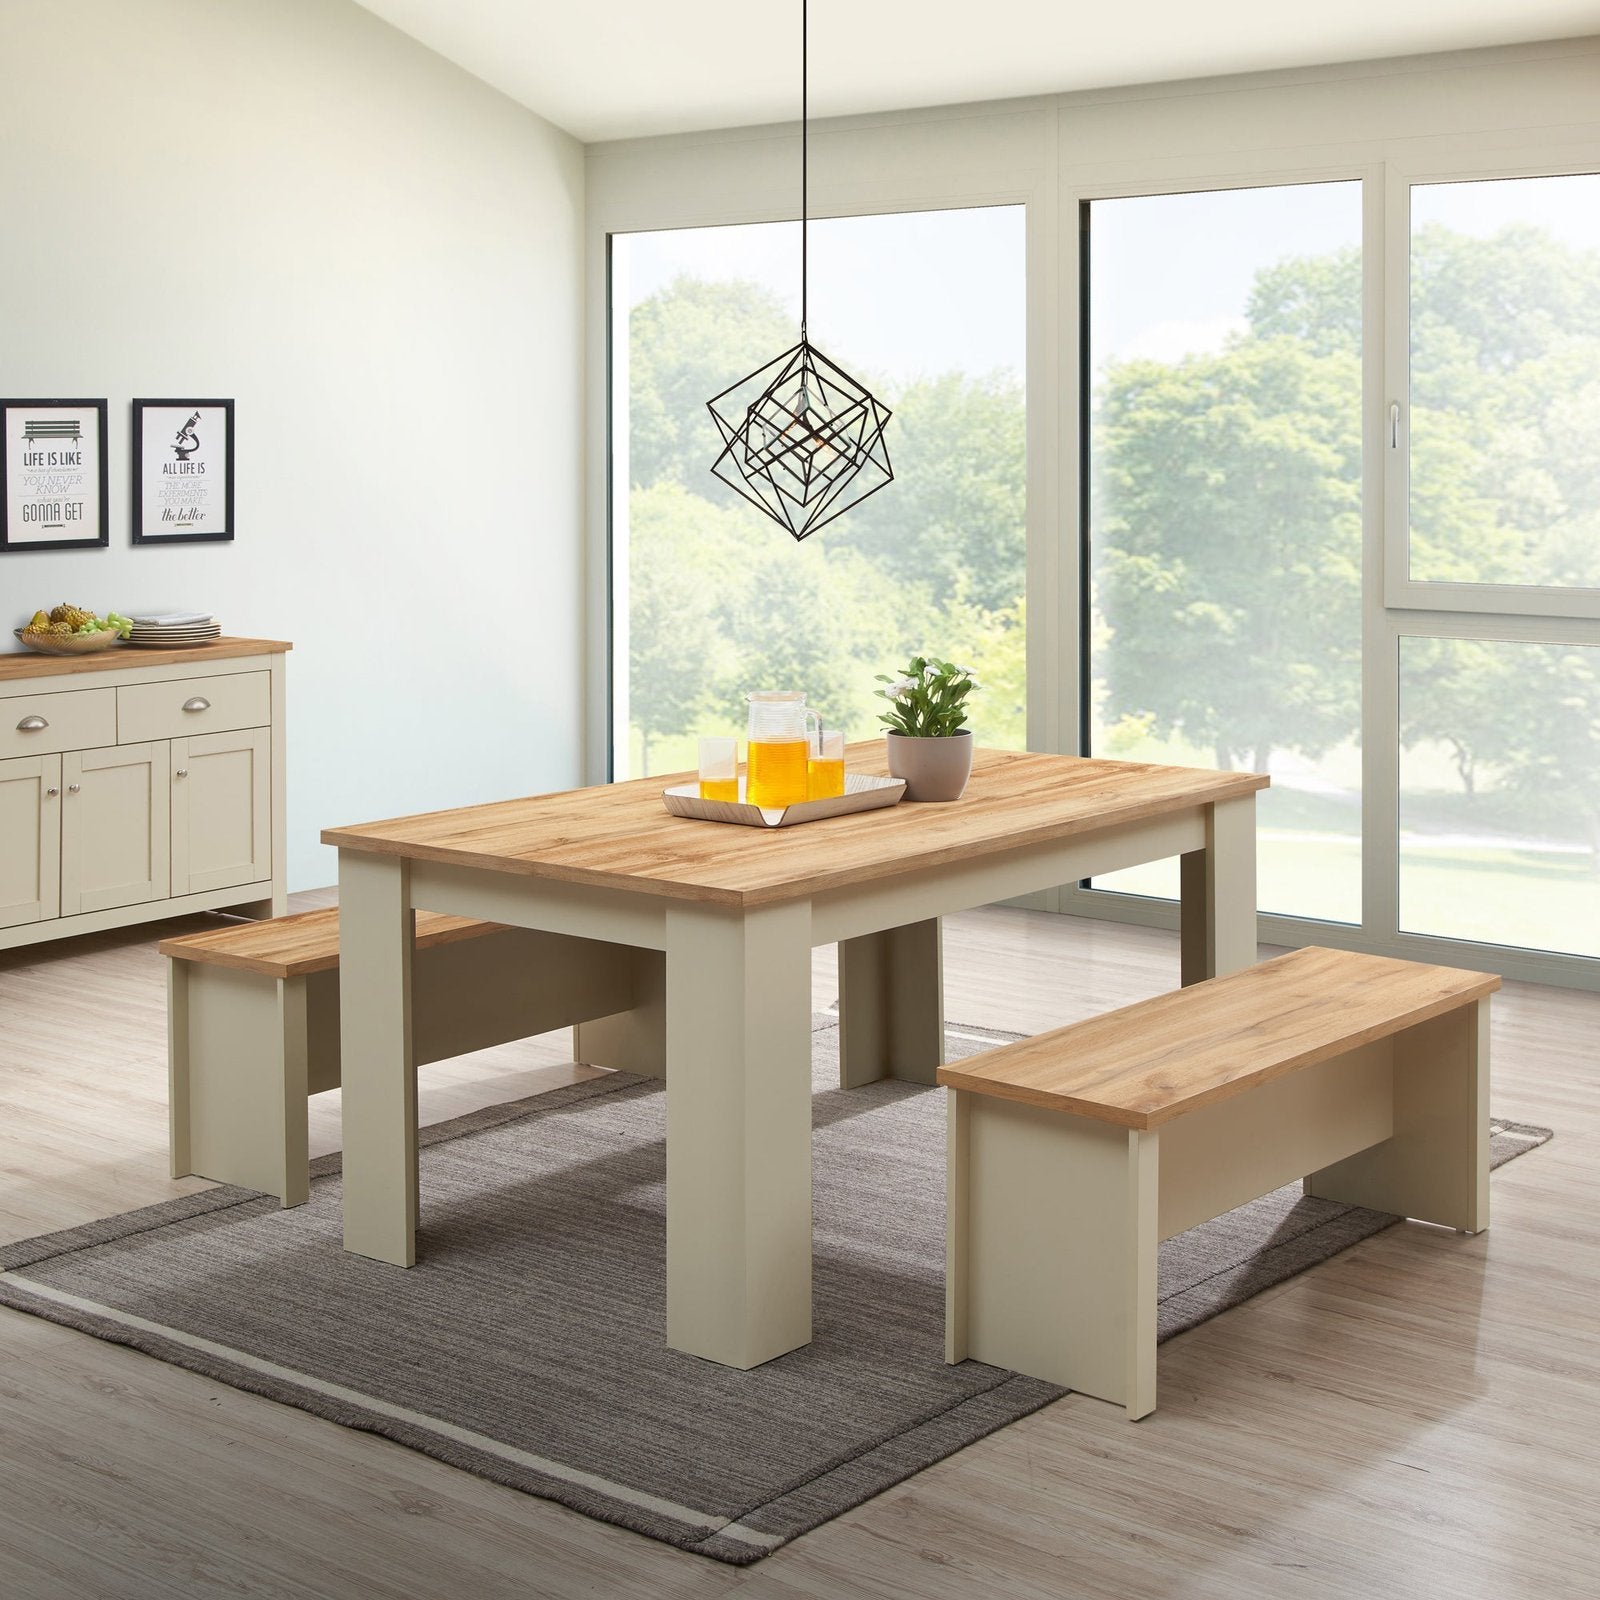 Lisbon 150cm Dining Table Set with 2 Benches